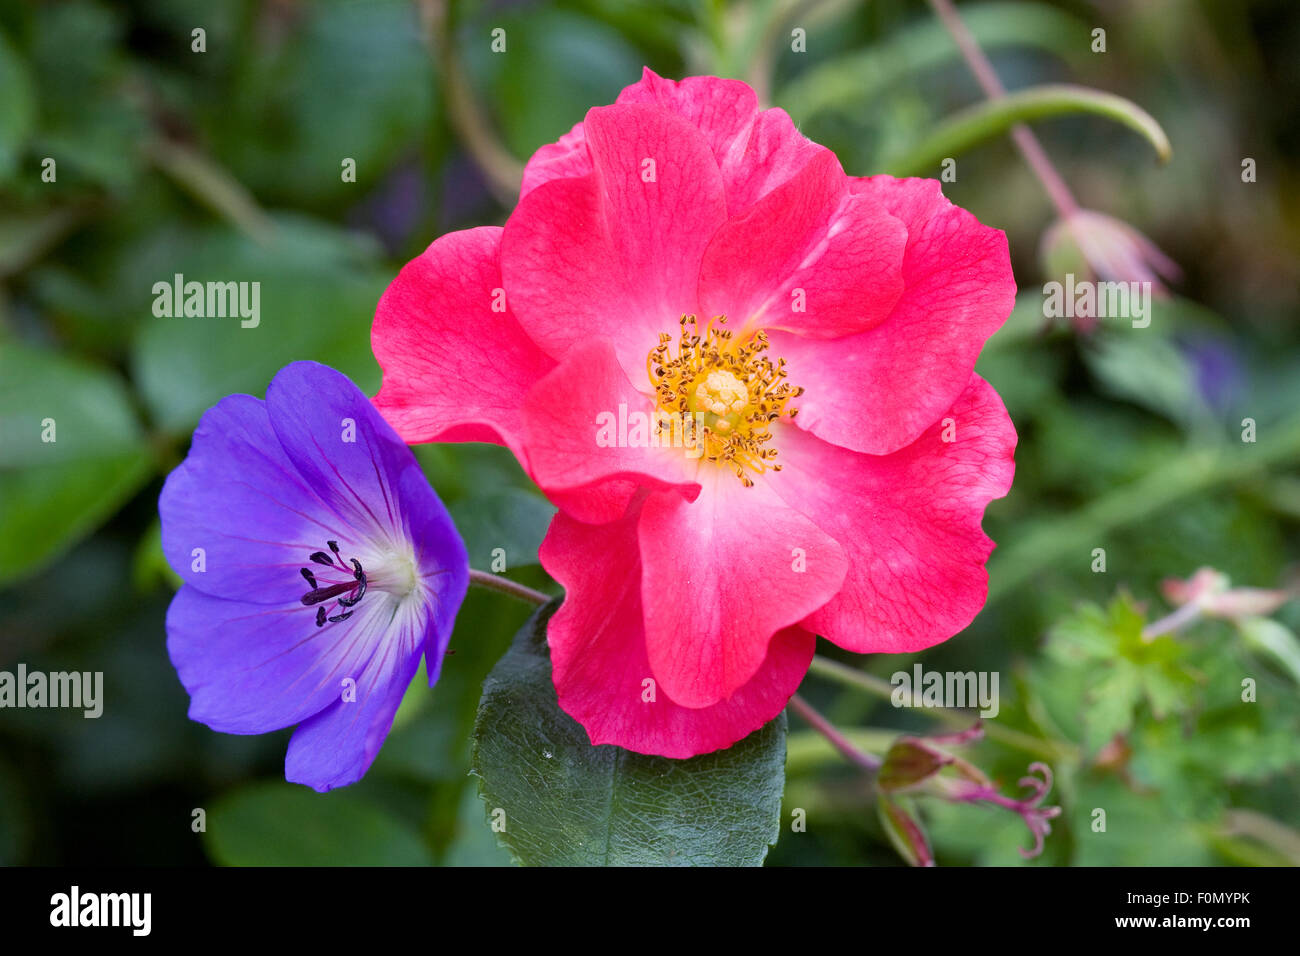 Pink rose and blue geranium in an herbaceous border. Stock Photo